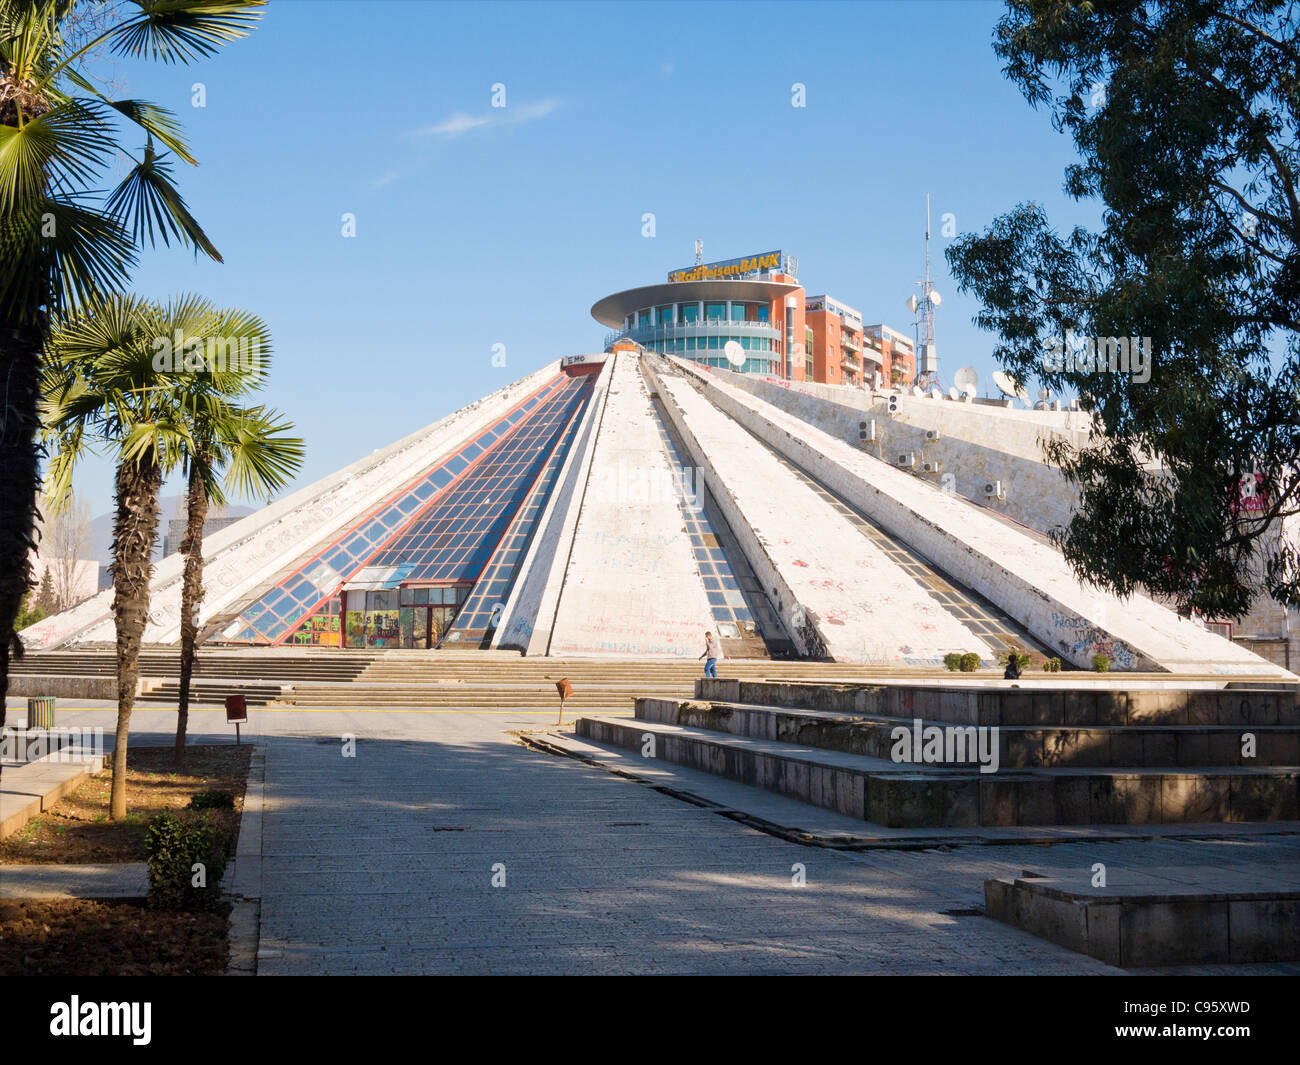 The pyramid building, Albanian International Centre of Culture, in Tirana, Albania, is in a state of disrepair. Stock Photo